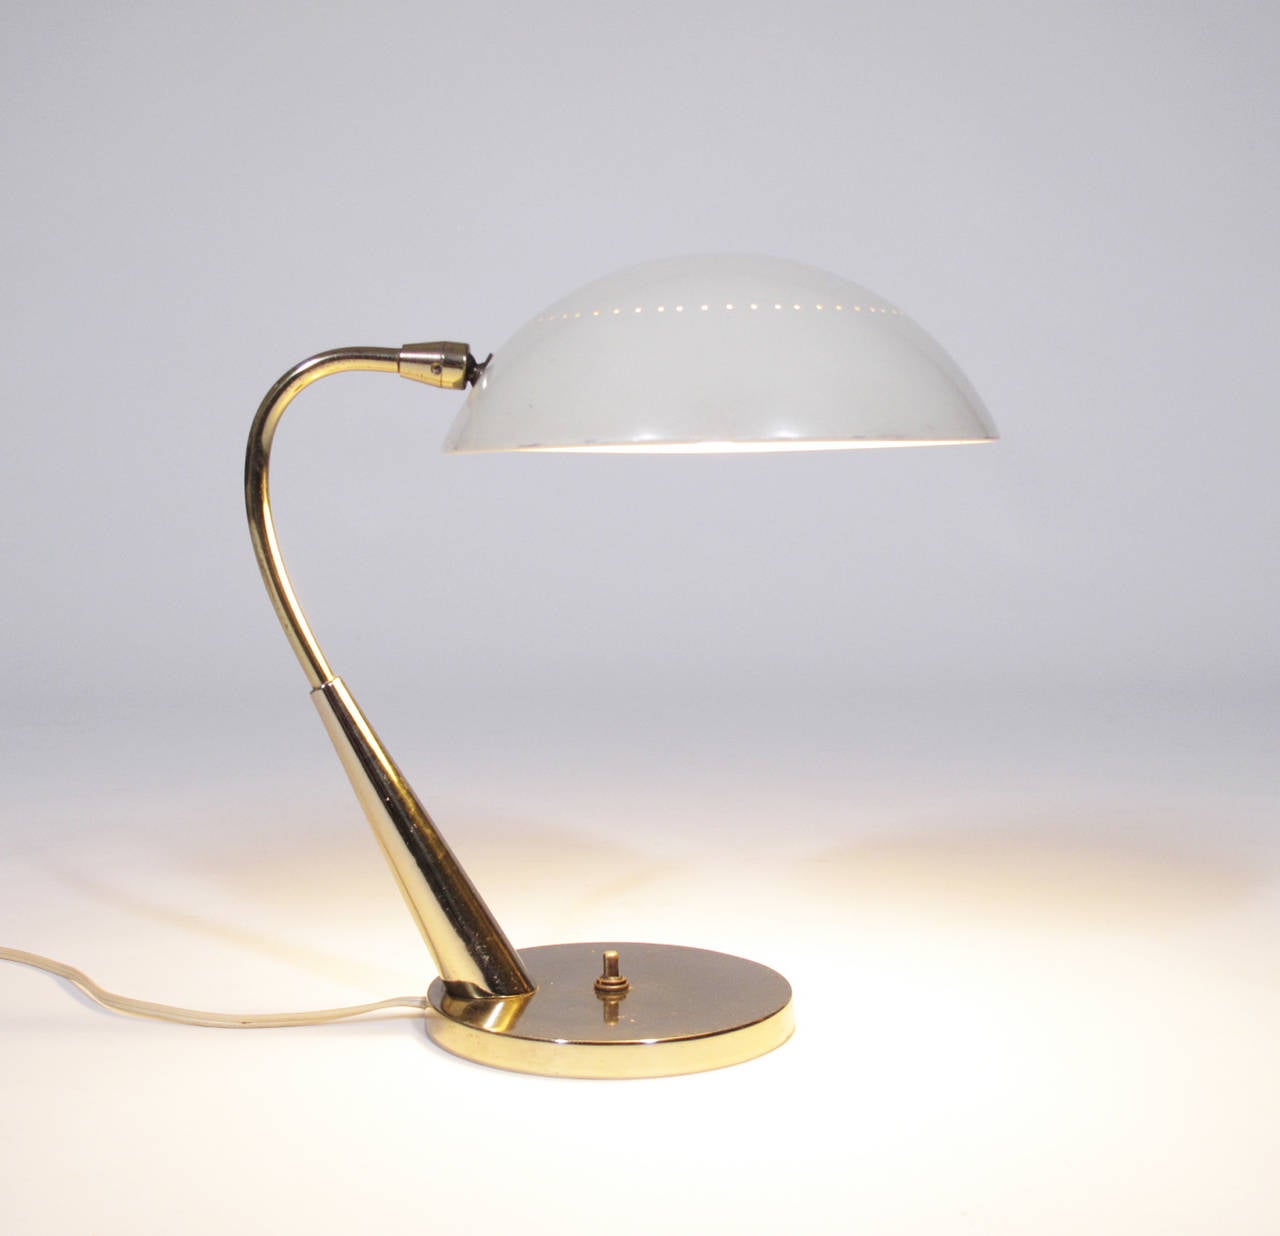 Beautiful example of 1950s lighting design, this elegant table lamp in brass and a lacquered metal is in the true style of Stilnovo.